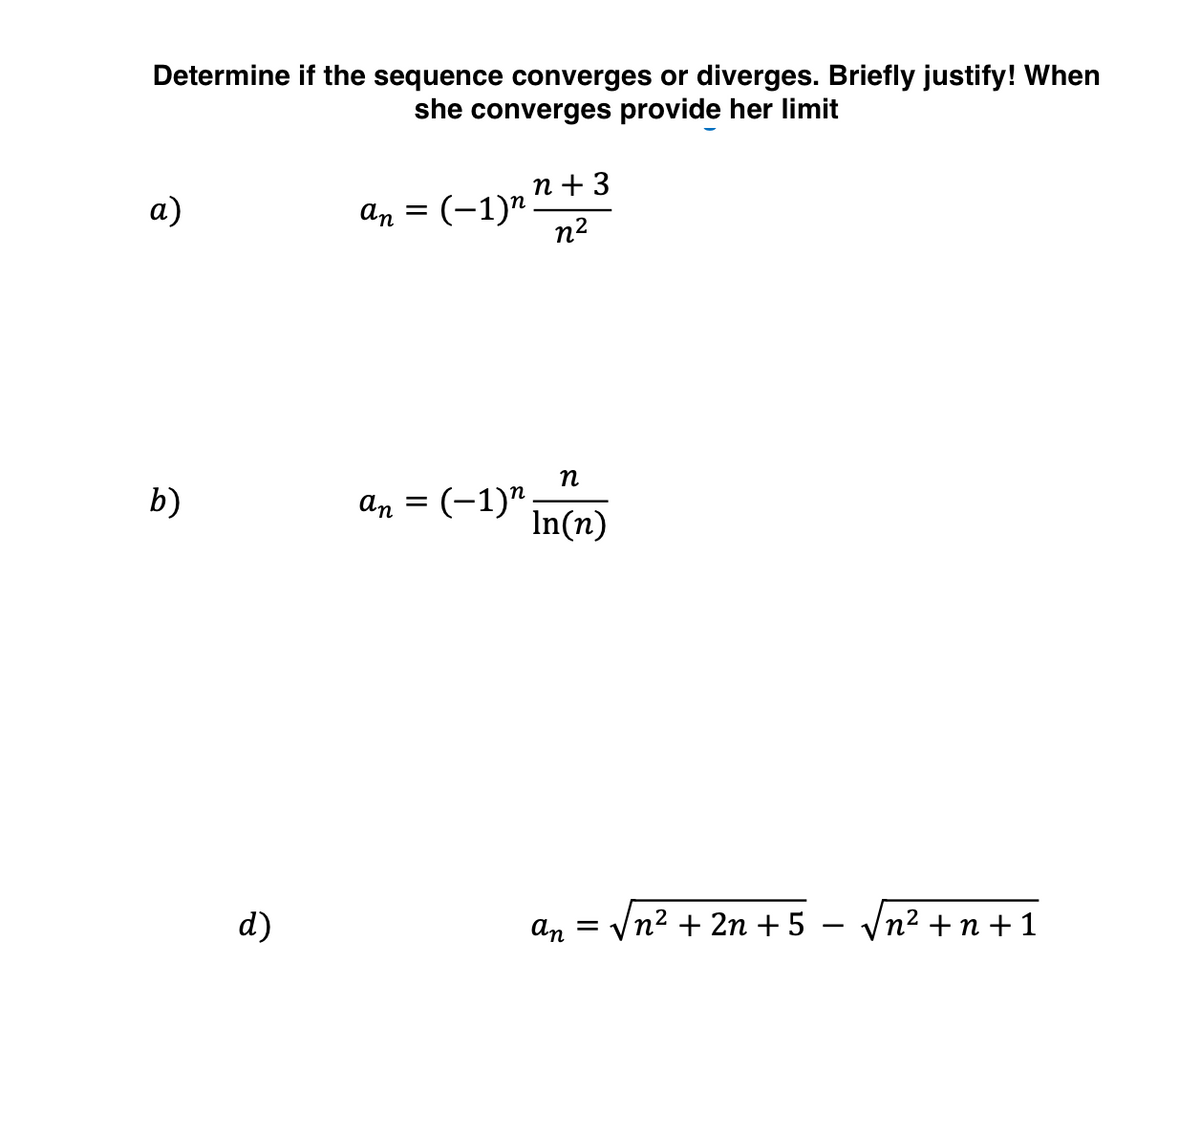 Determine if the sequence converges or diverges. Briefly justify! When
she converges provide her limit
n + 3
а)
An = (-1)".
n2
b)
an = (-1)" in(n)
d)
An
Vn2 + 2n + 5 - Vn² +n + 1
